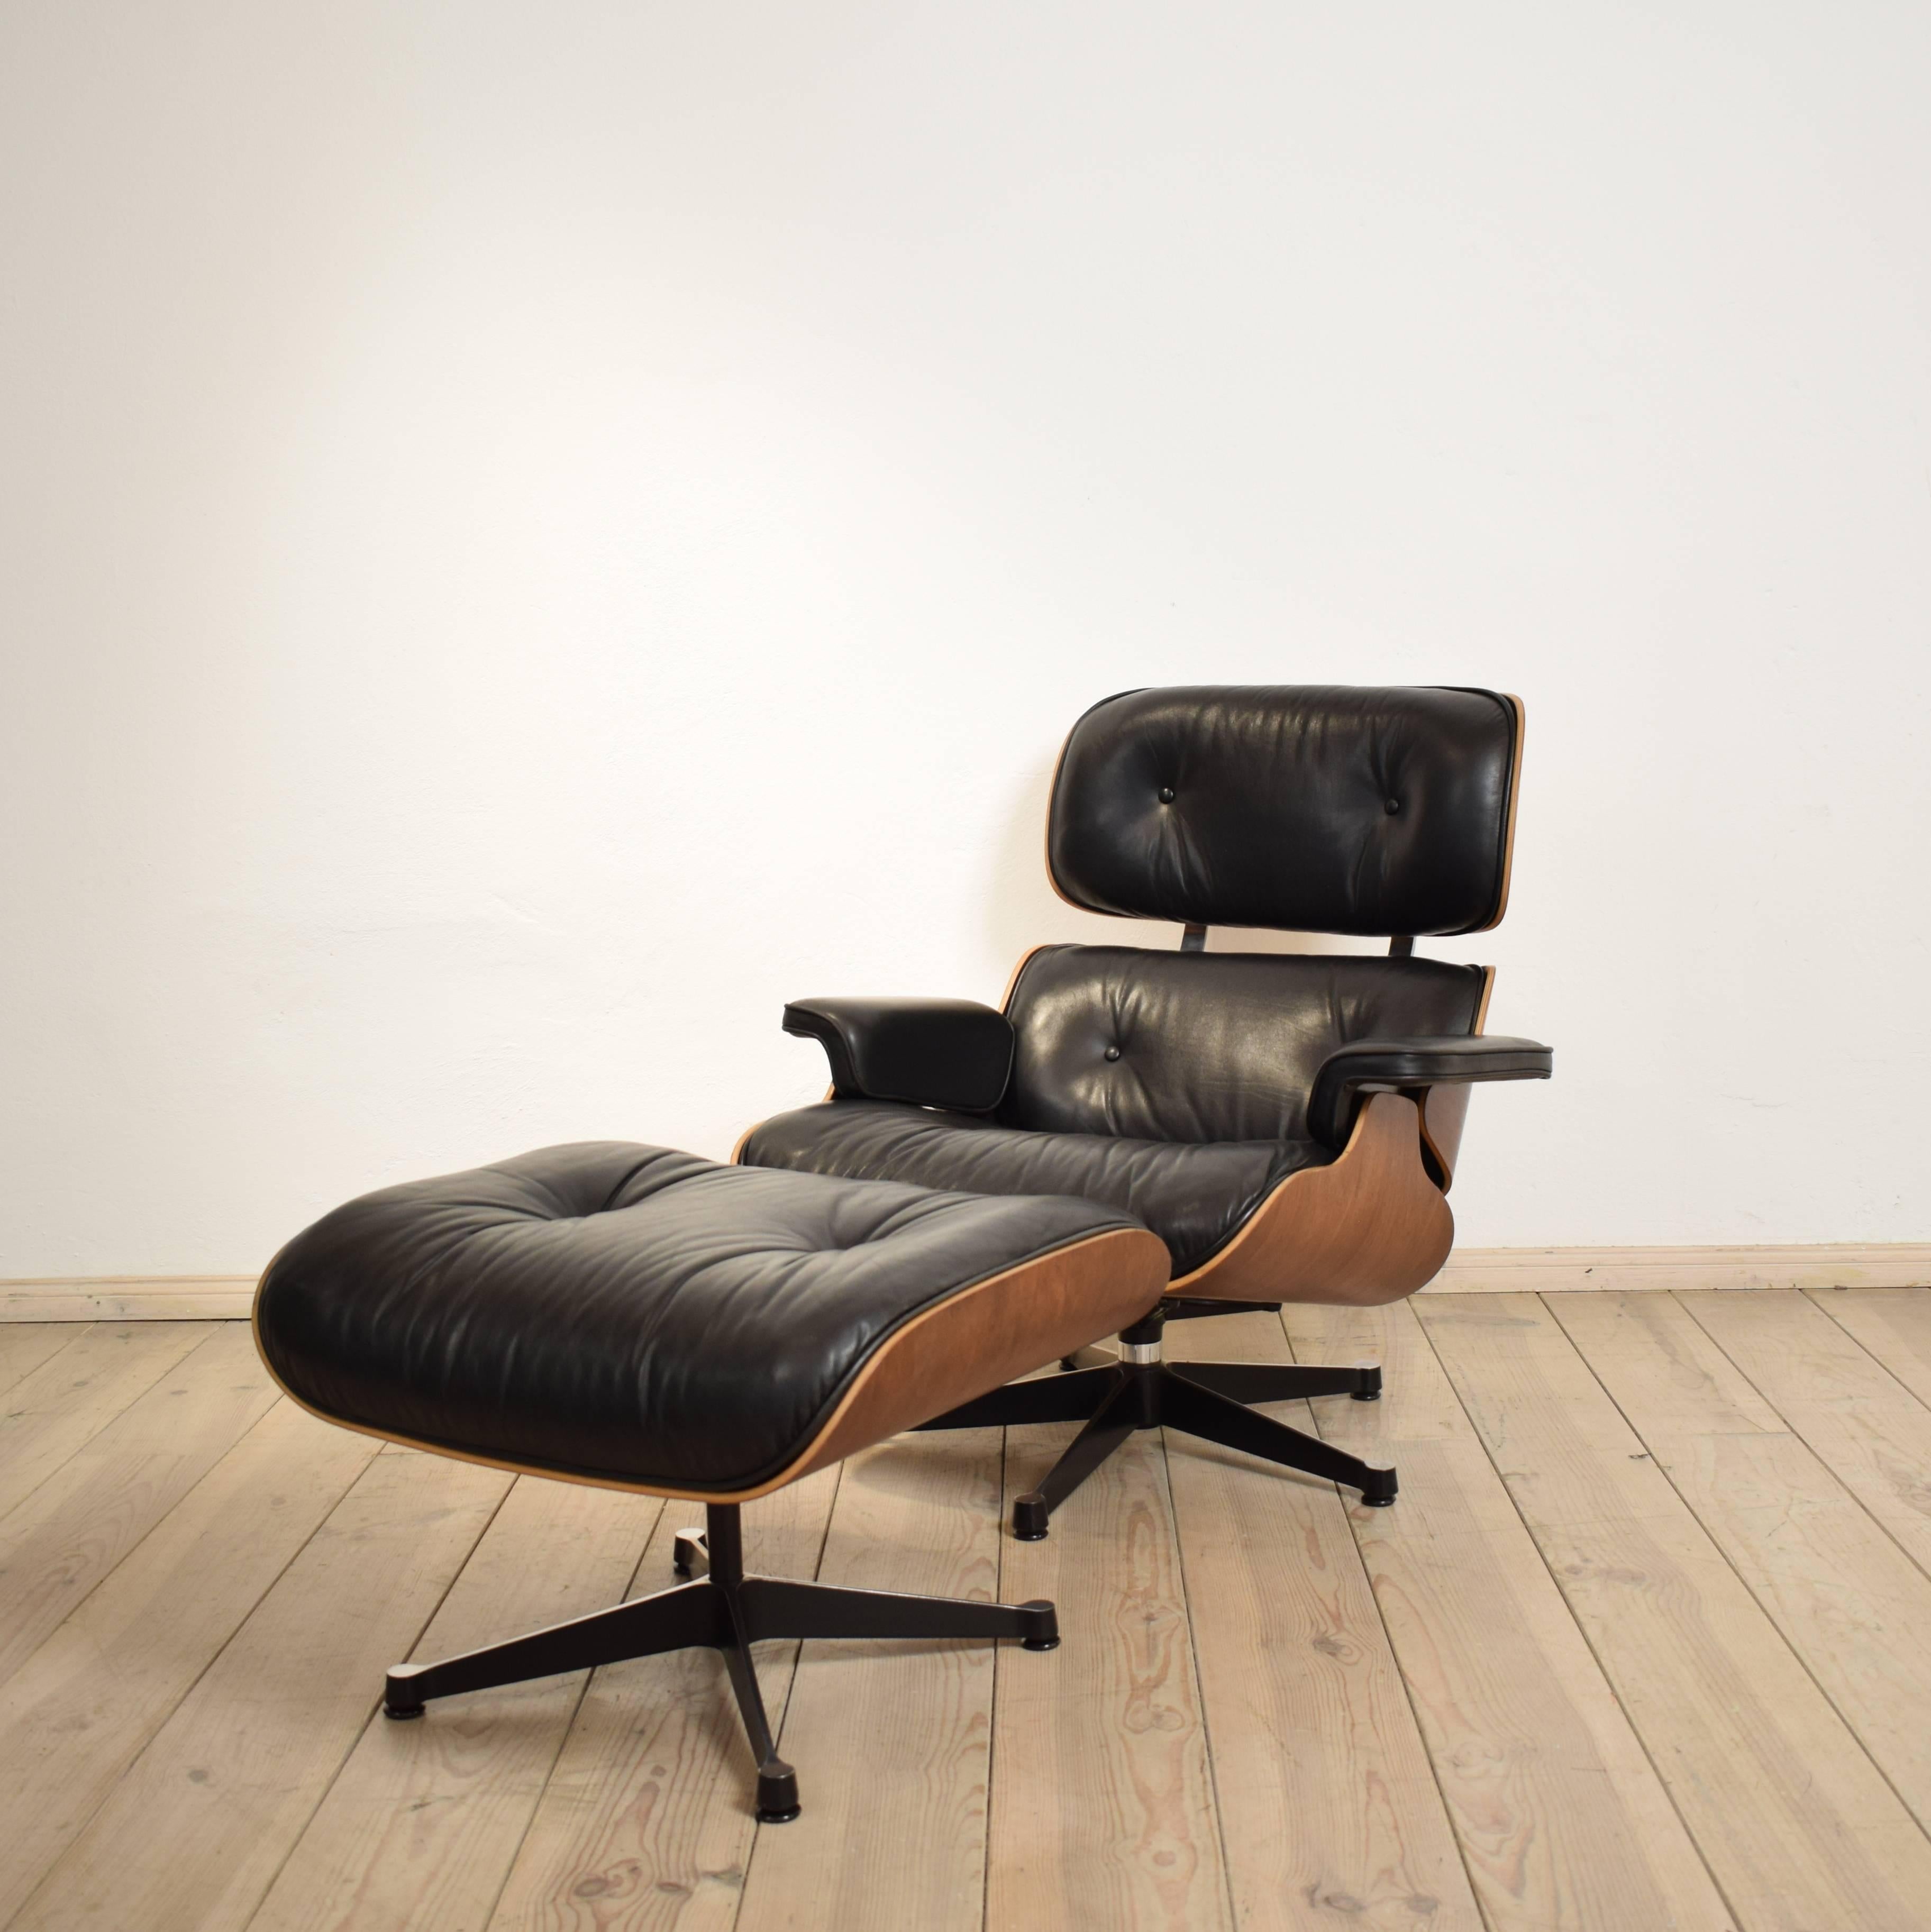 This lounge chair by Charles and Ray Eames comes with a ottoman and is out of rosewood and has black leather cushions.
It is produced by Vitra.
The chair is in perfect condition.
The leather was cleaned and conditioned and the wood was also